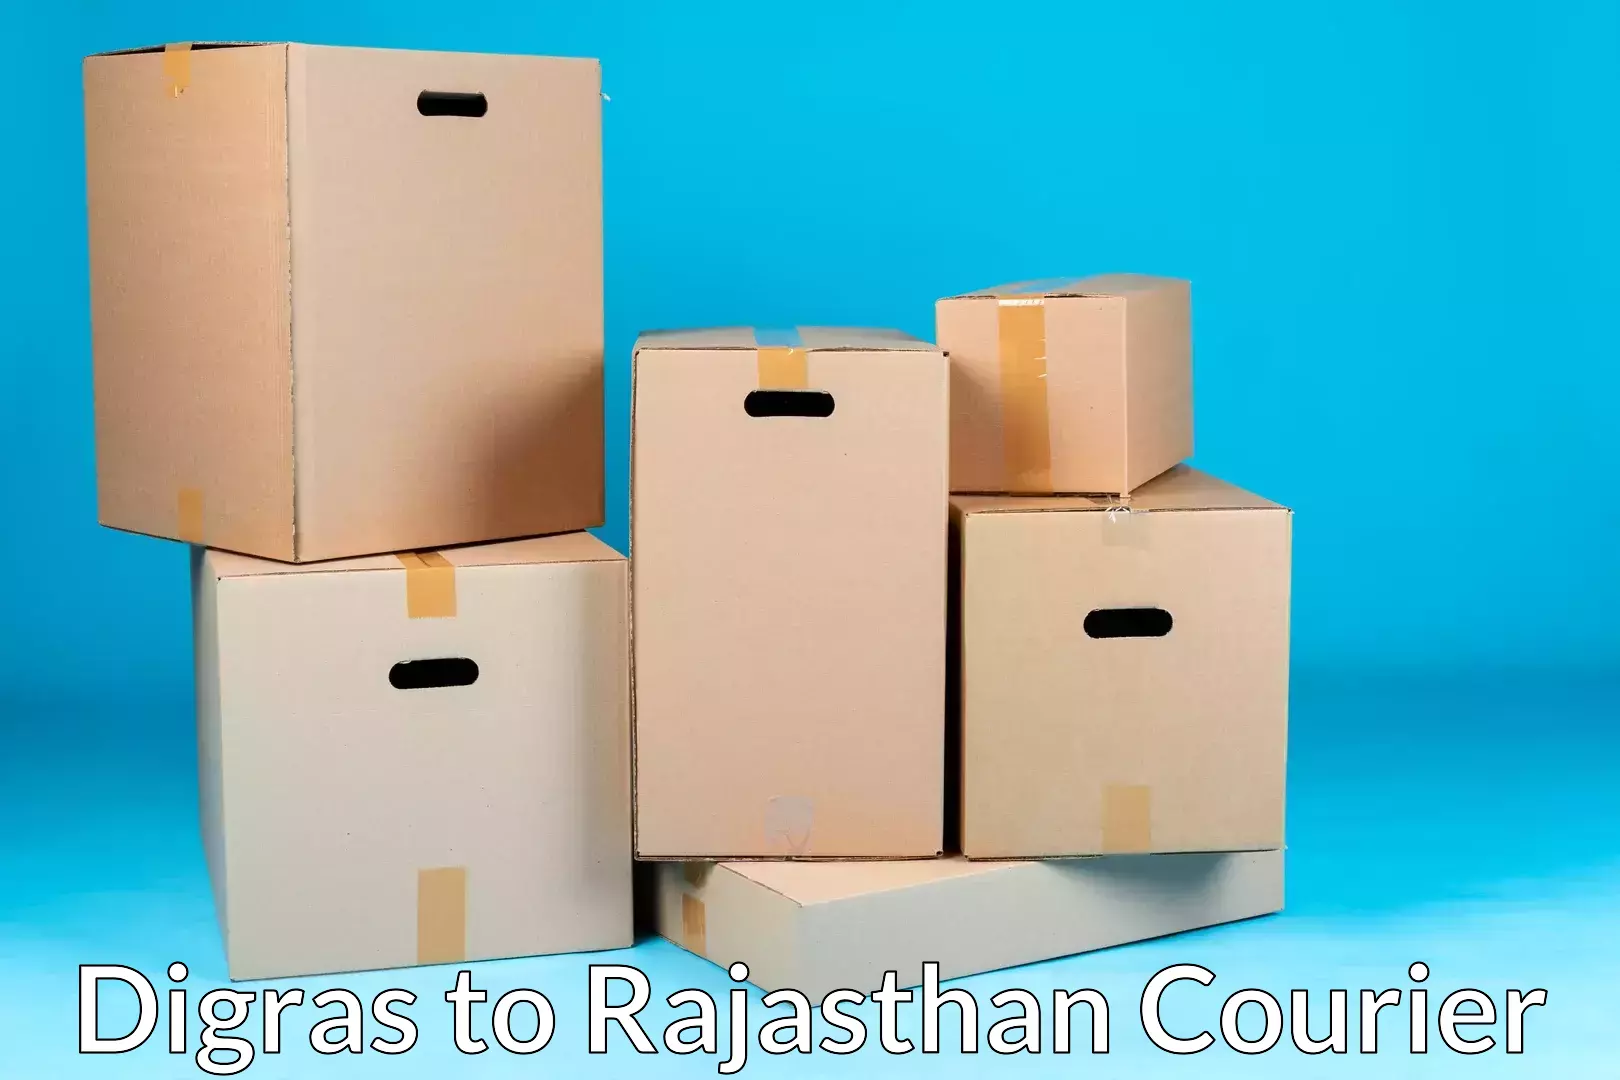 Seamless moving process Digras to Rajasthan